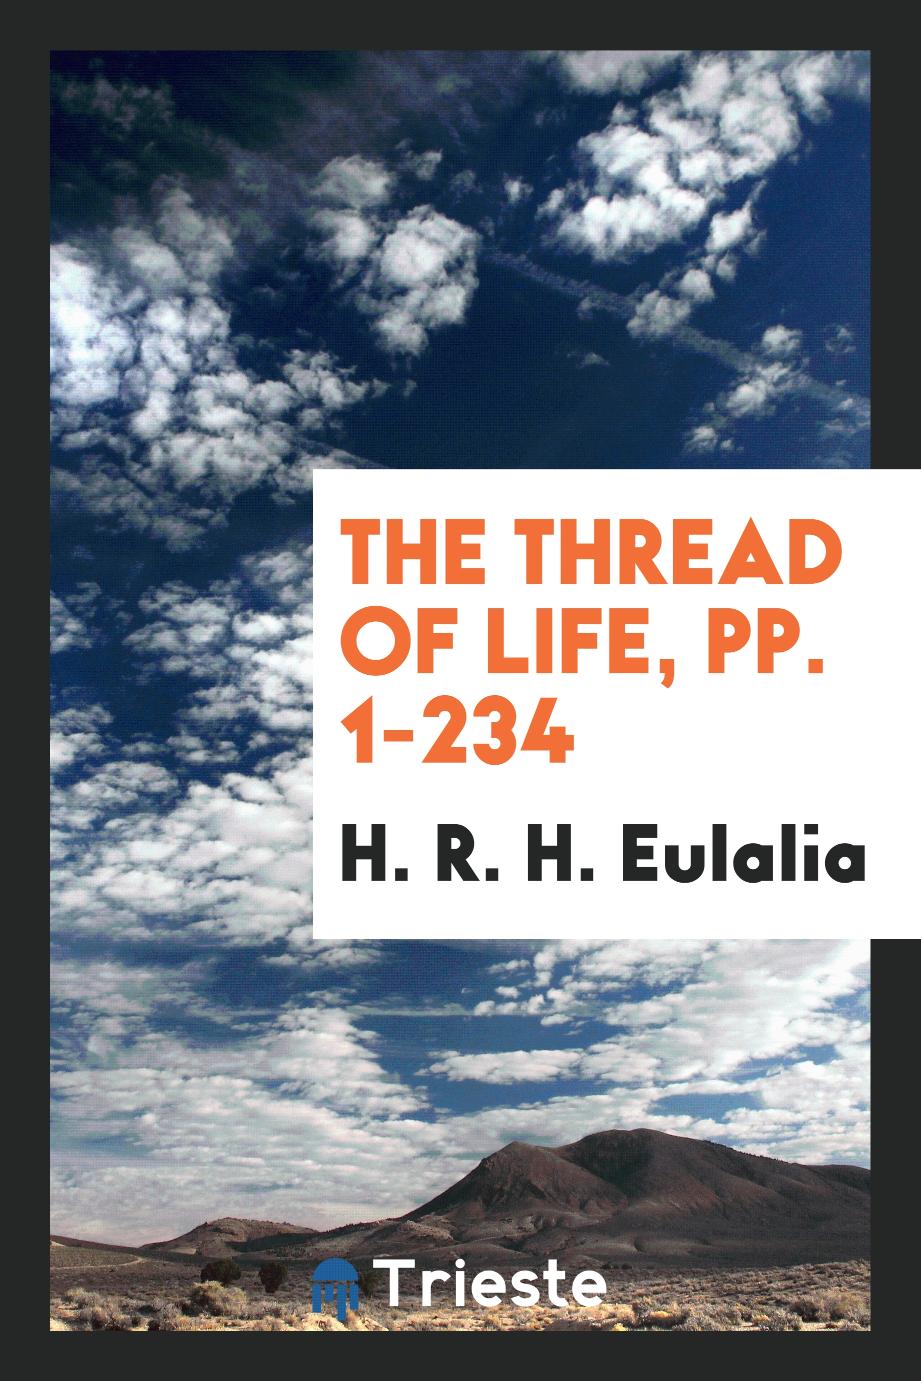 The Thread of Life, pp. 1-234